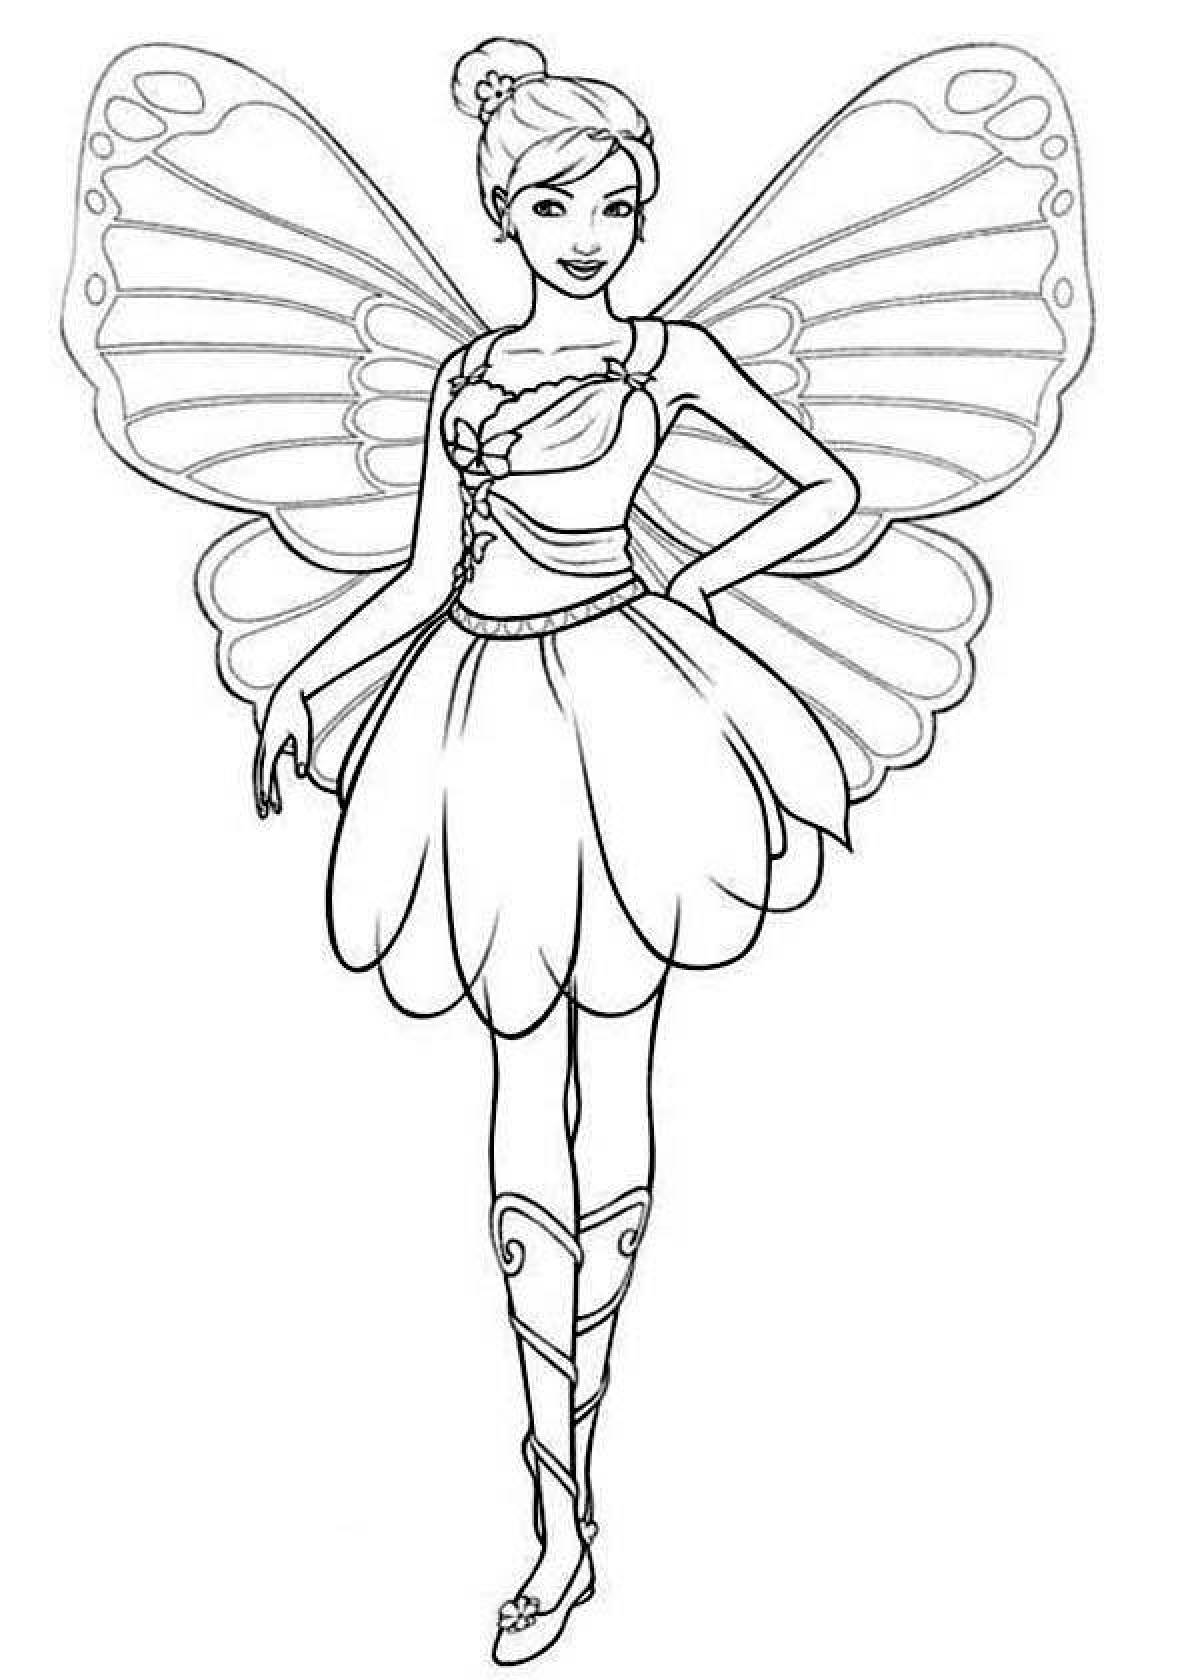 Coloring book charming fairy barbie